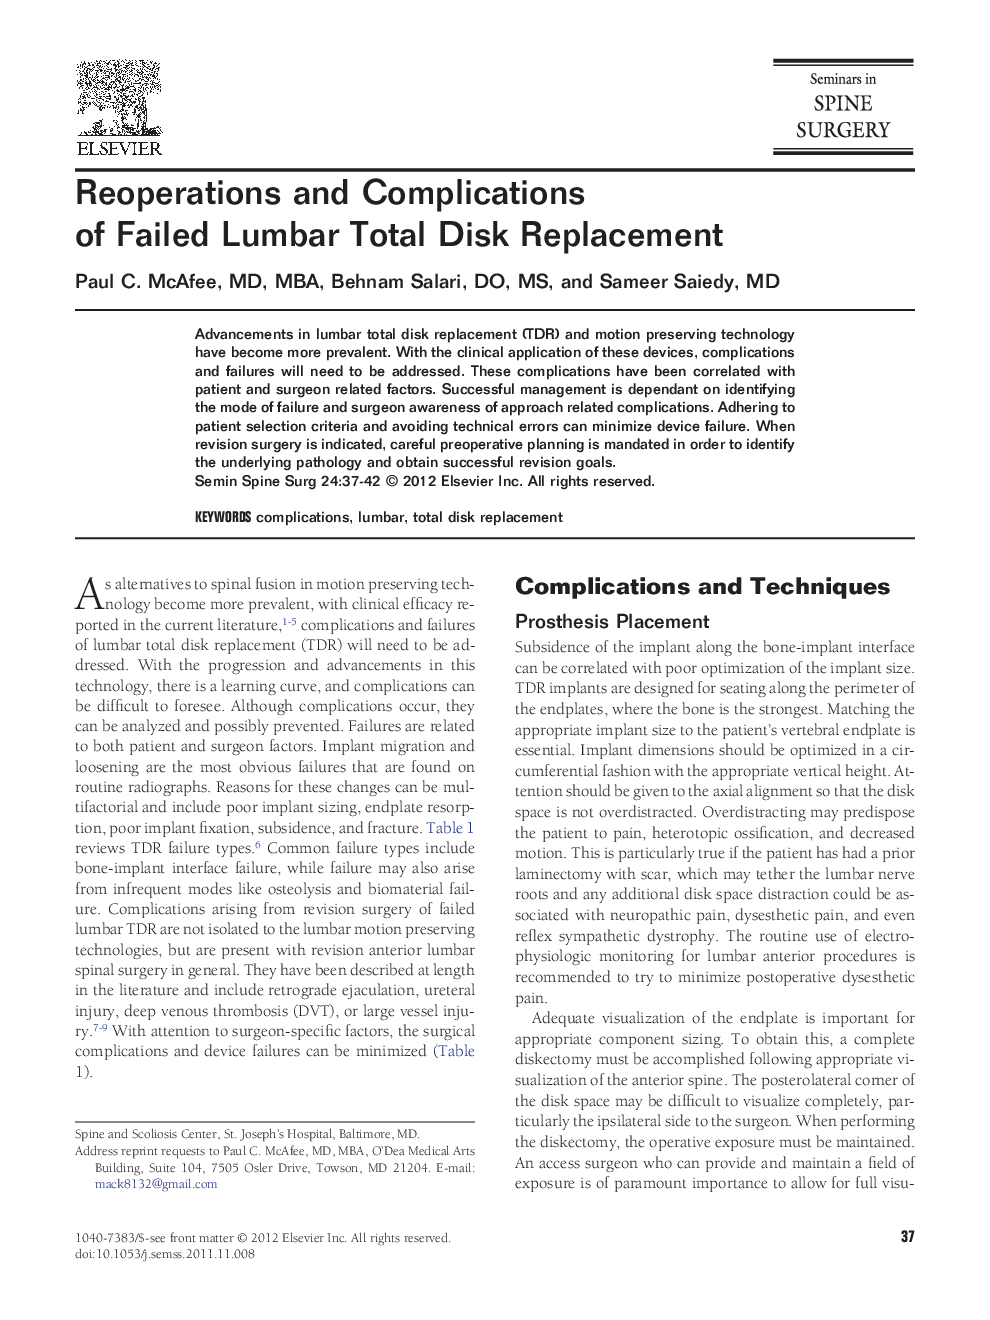 Reoperations and Complications of Failed Lumbar Total Disk Replacement